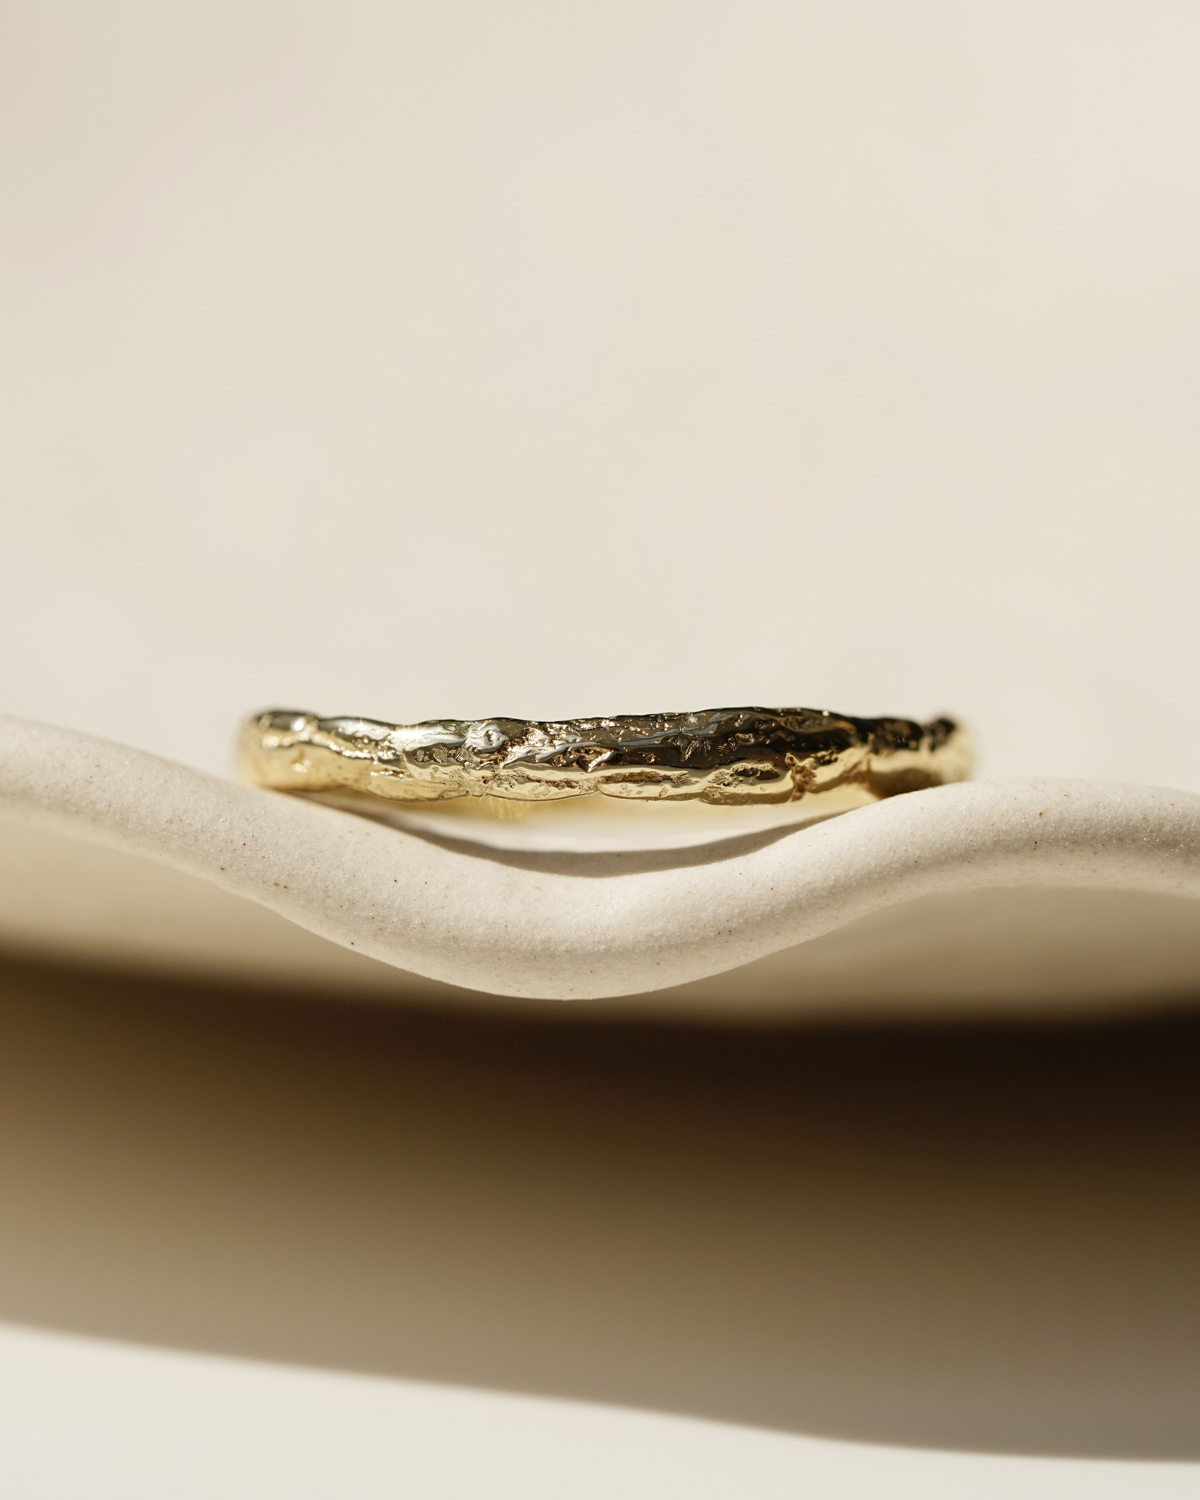 textured gold ring on a clay tray